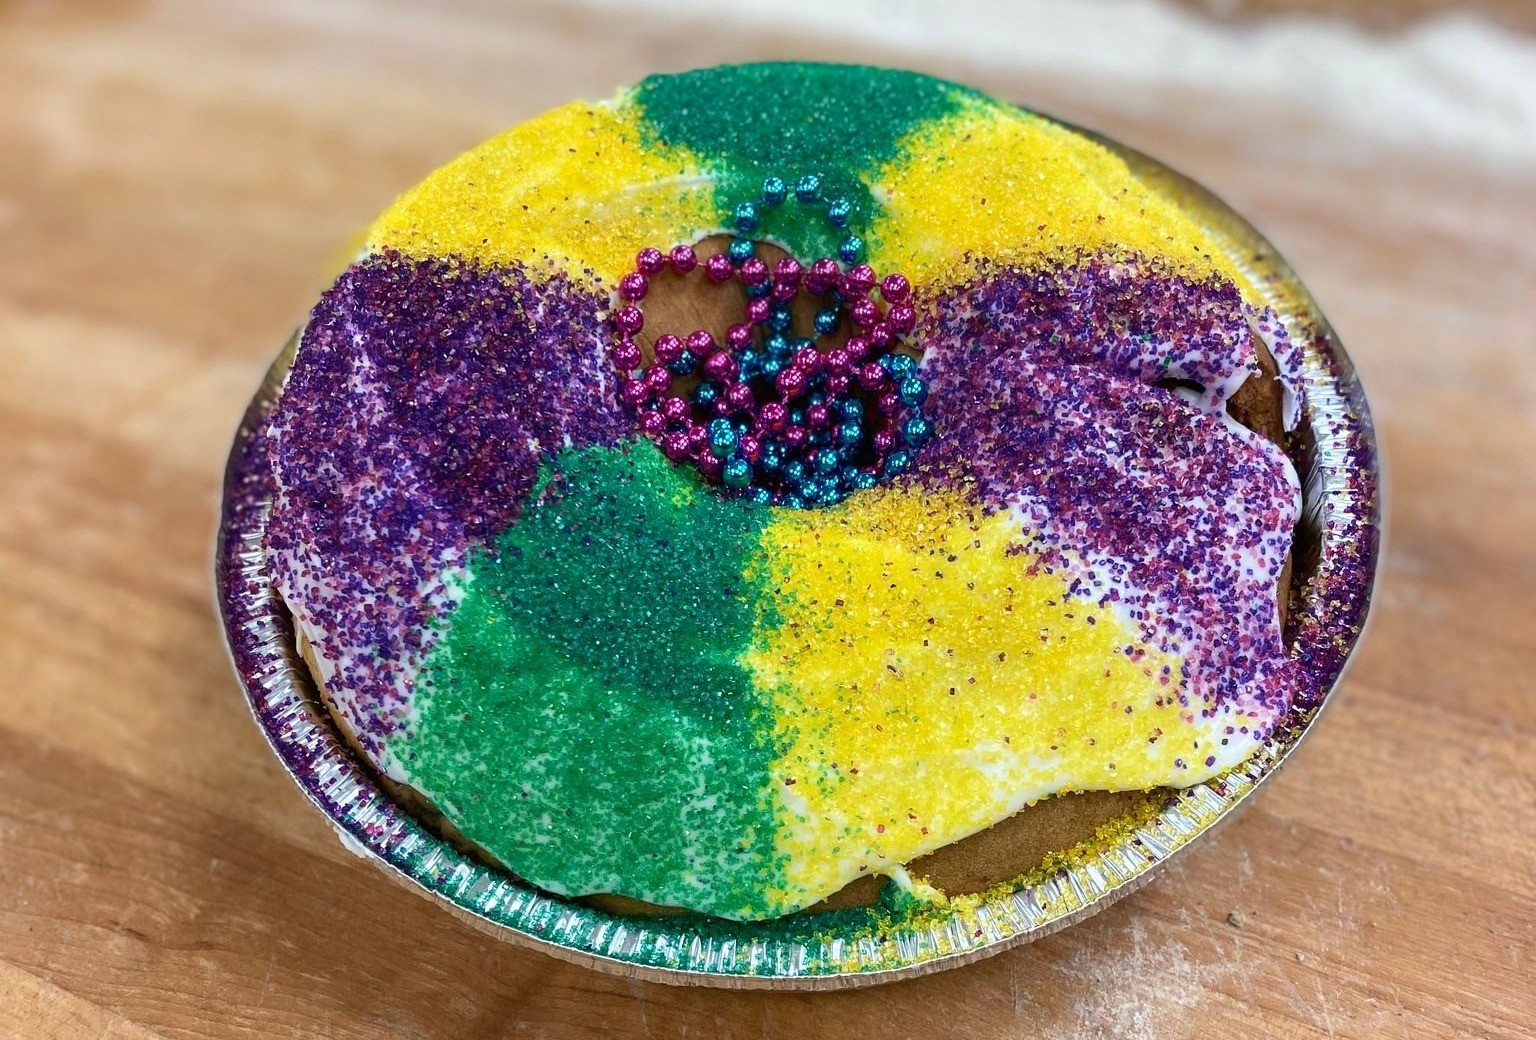 A circular cake with yellow, green, and purple frosting, and beads in the center.